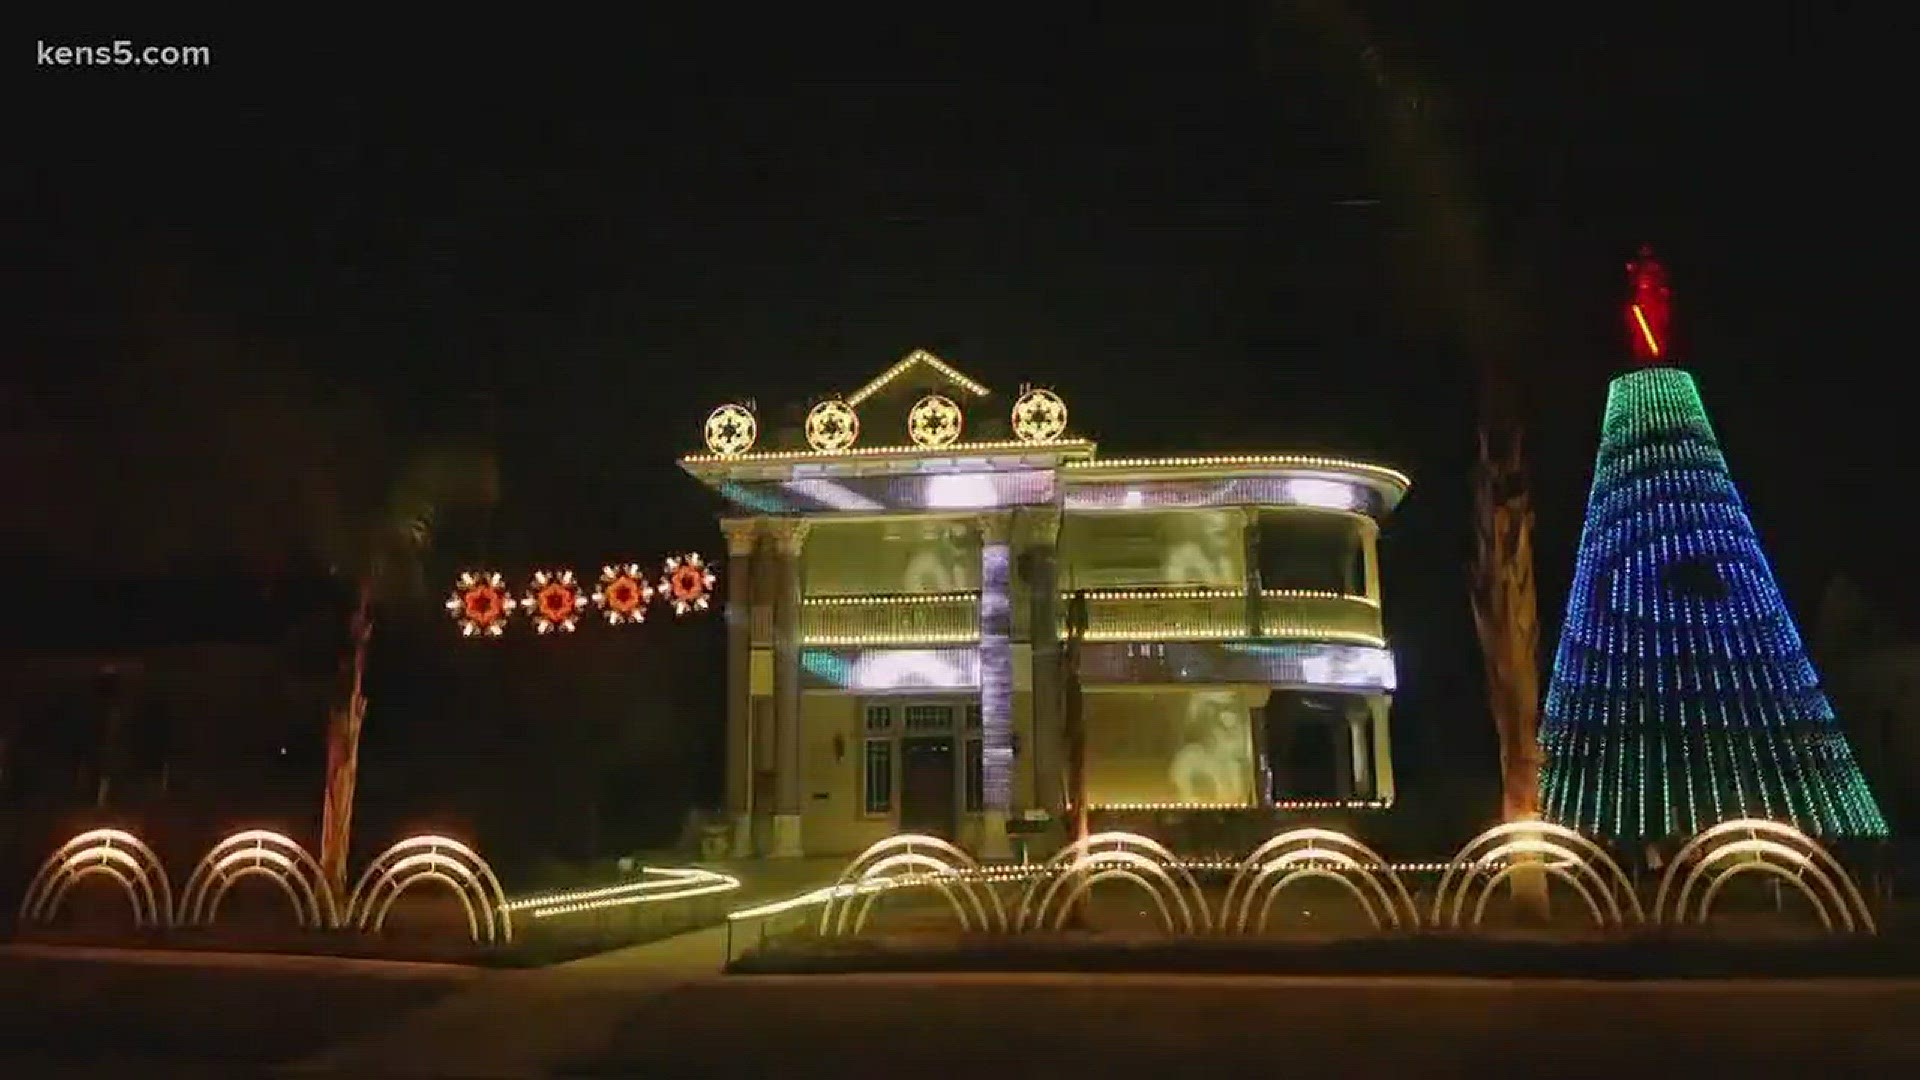 One house has gone viral because of its lights. Matt Johnson is the mastermind behind the Star Wars light show on Olive Street.